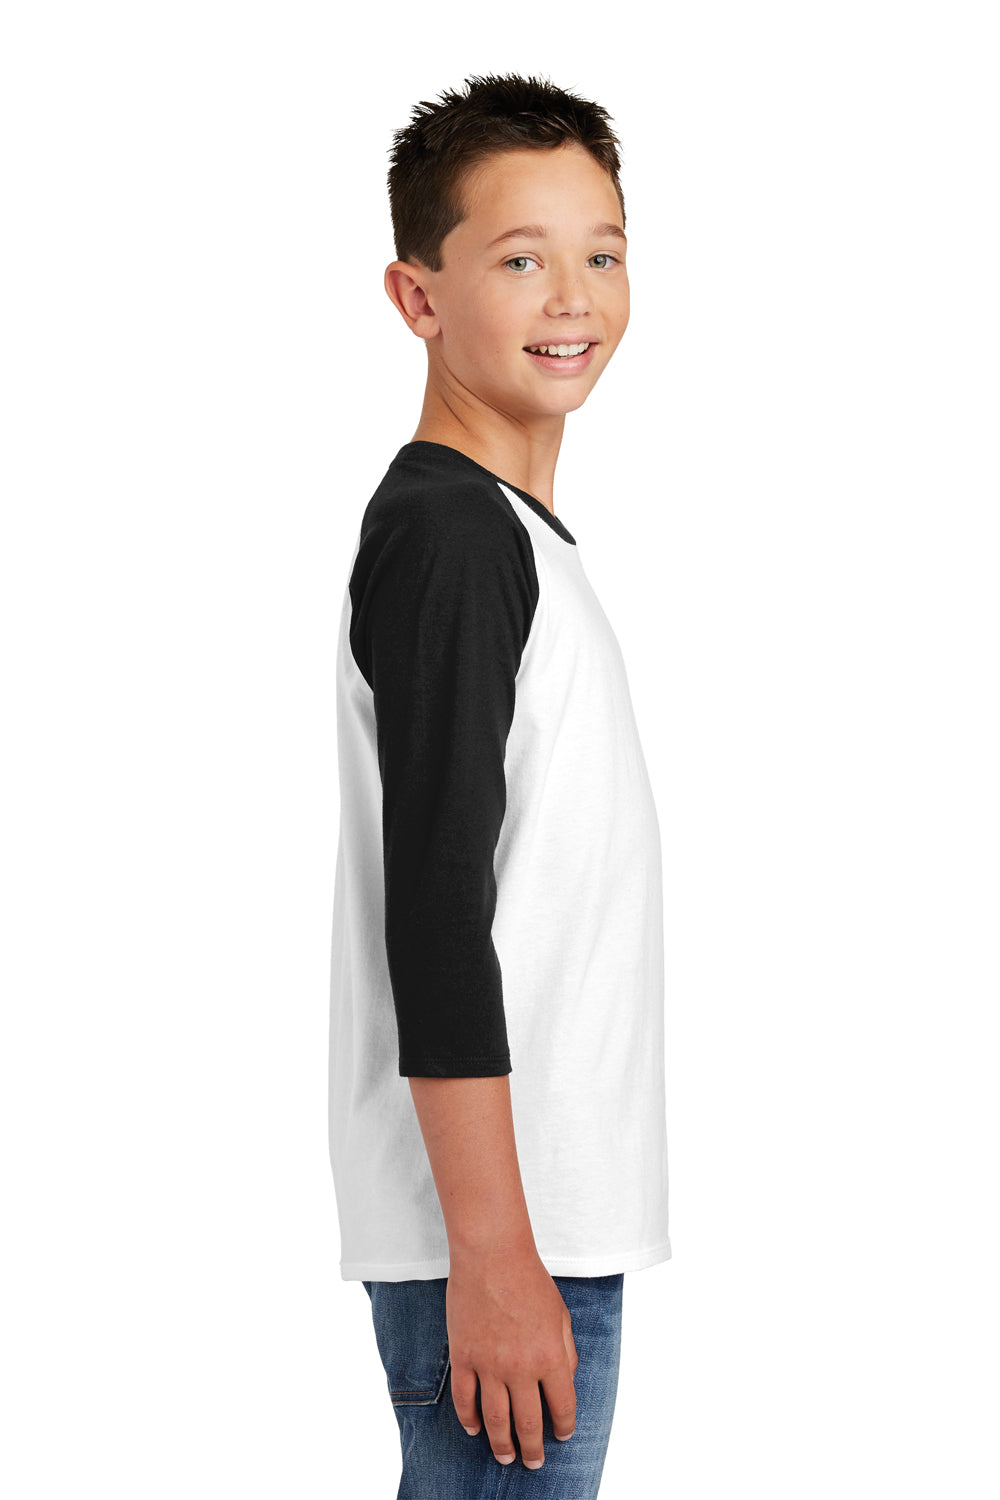 District DT6210Y Youth Very Important 3/4 Sleeve Crewneck T-Shirt White/Black Side